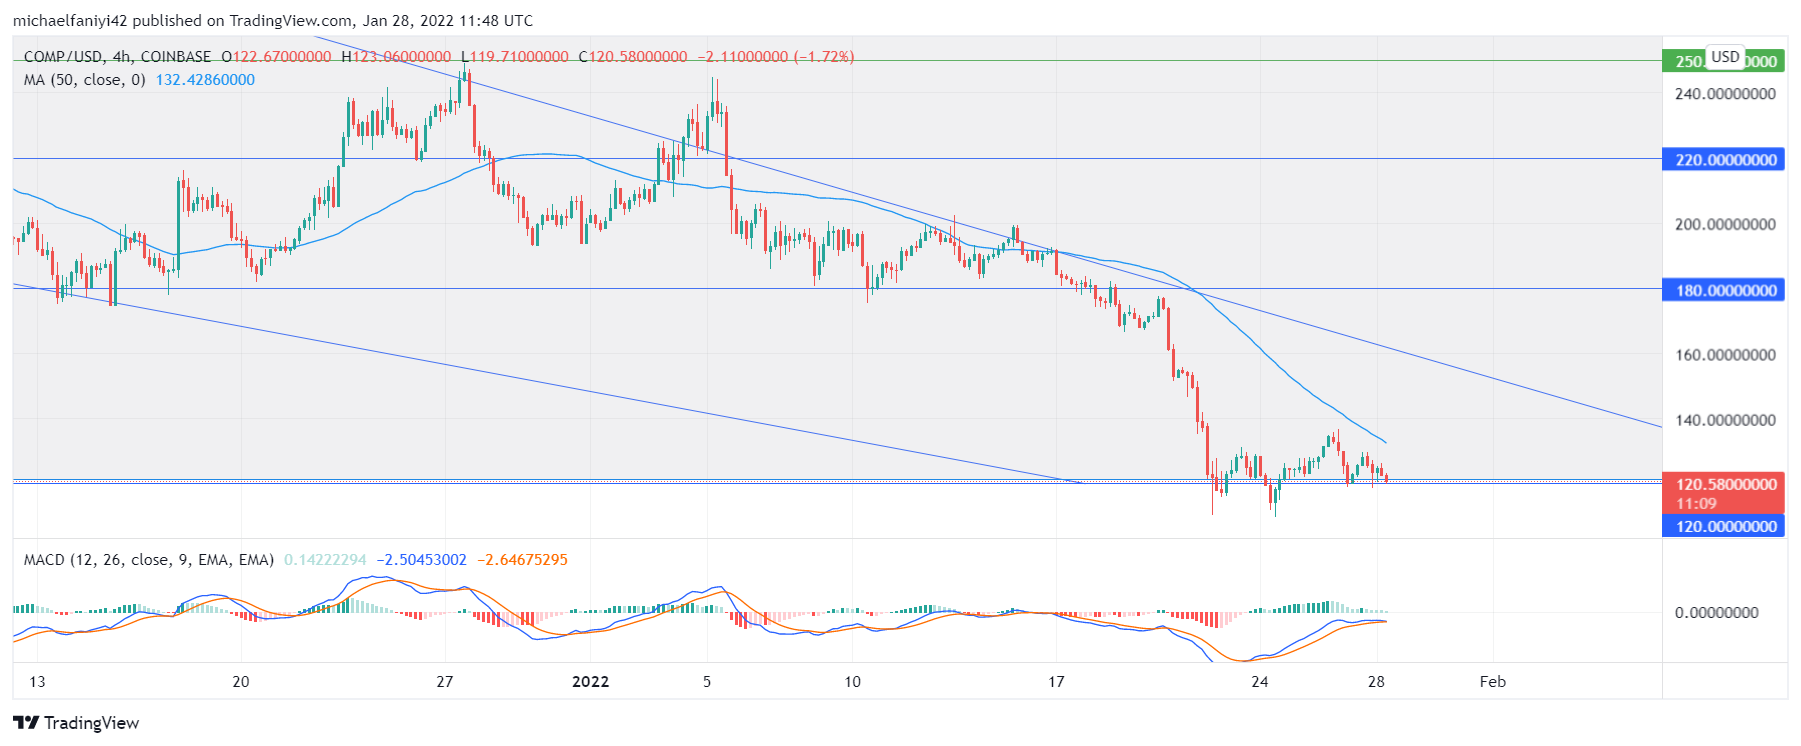 Compound Is Approaching Its All-Time Low Level After Dropping to $120